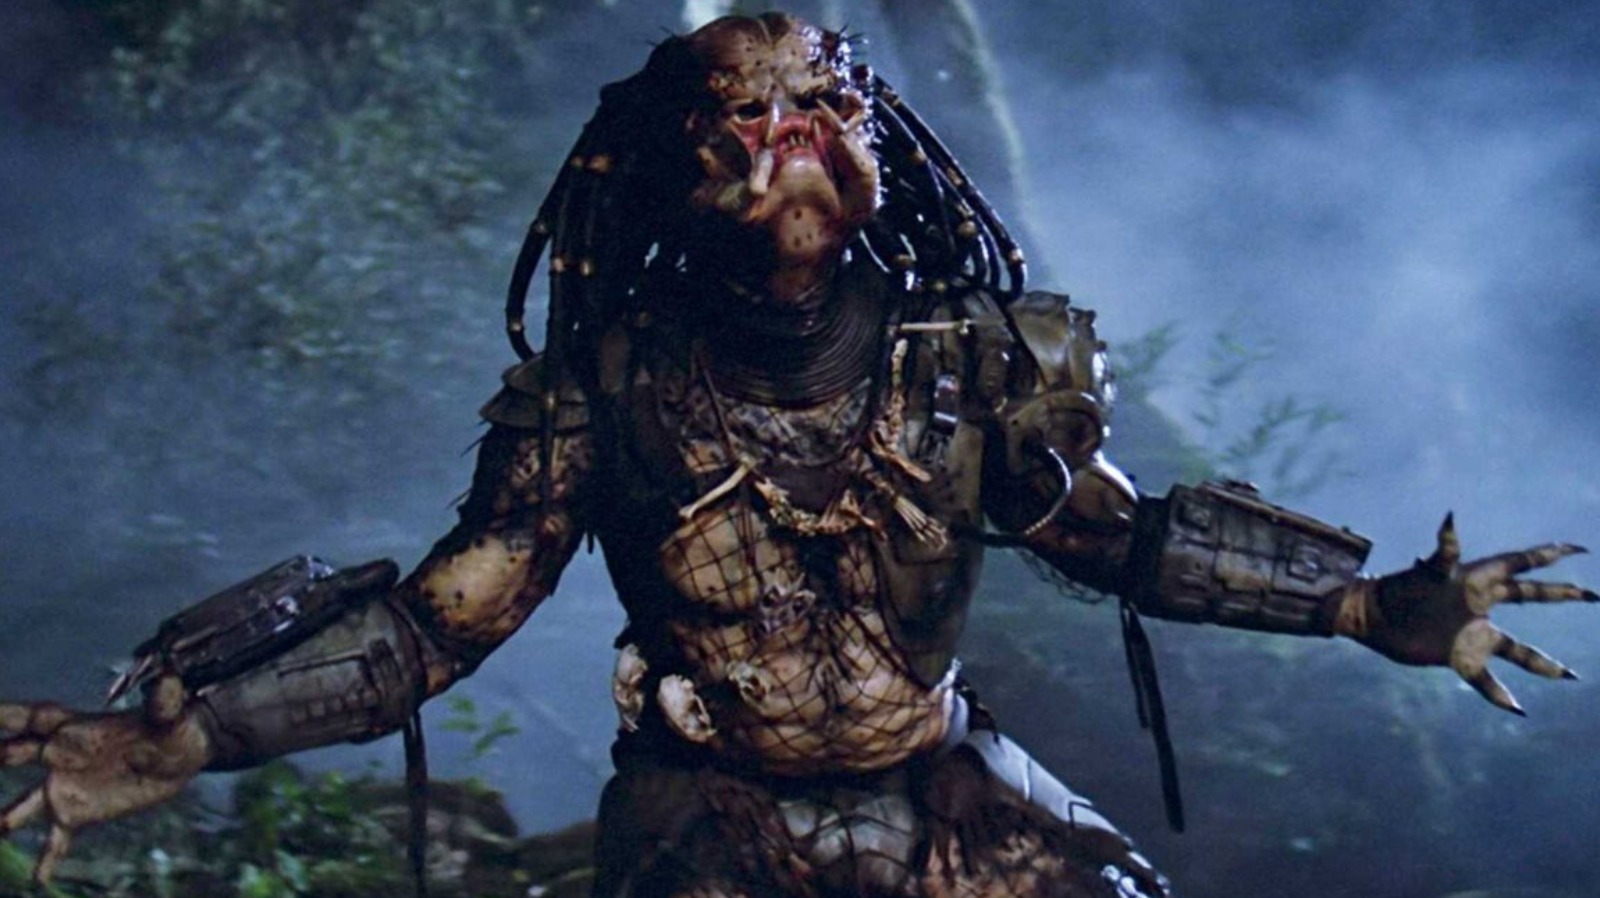 What is the story behind the design of the Predator costume in the